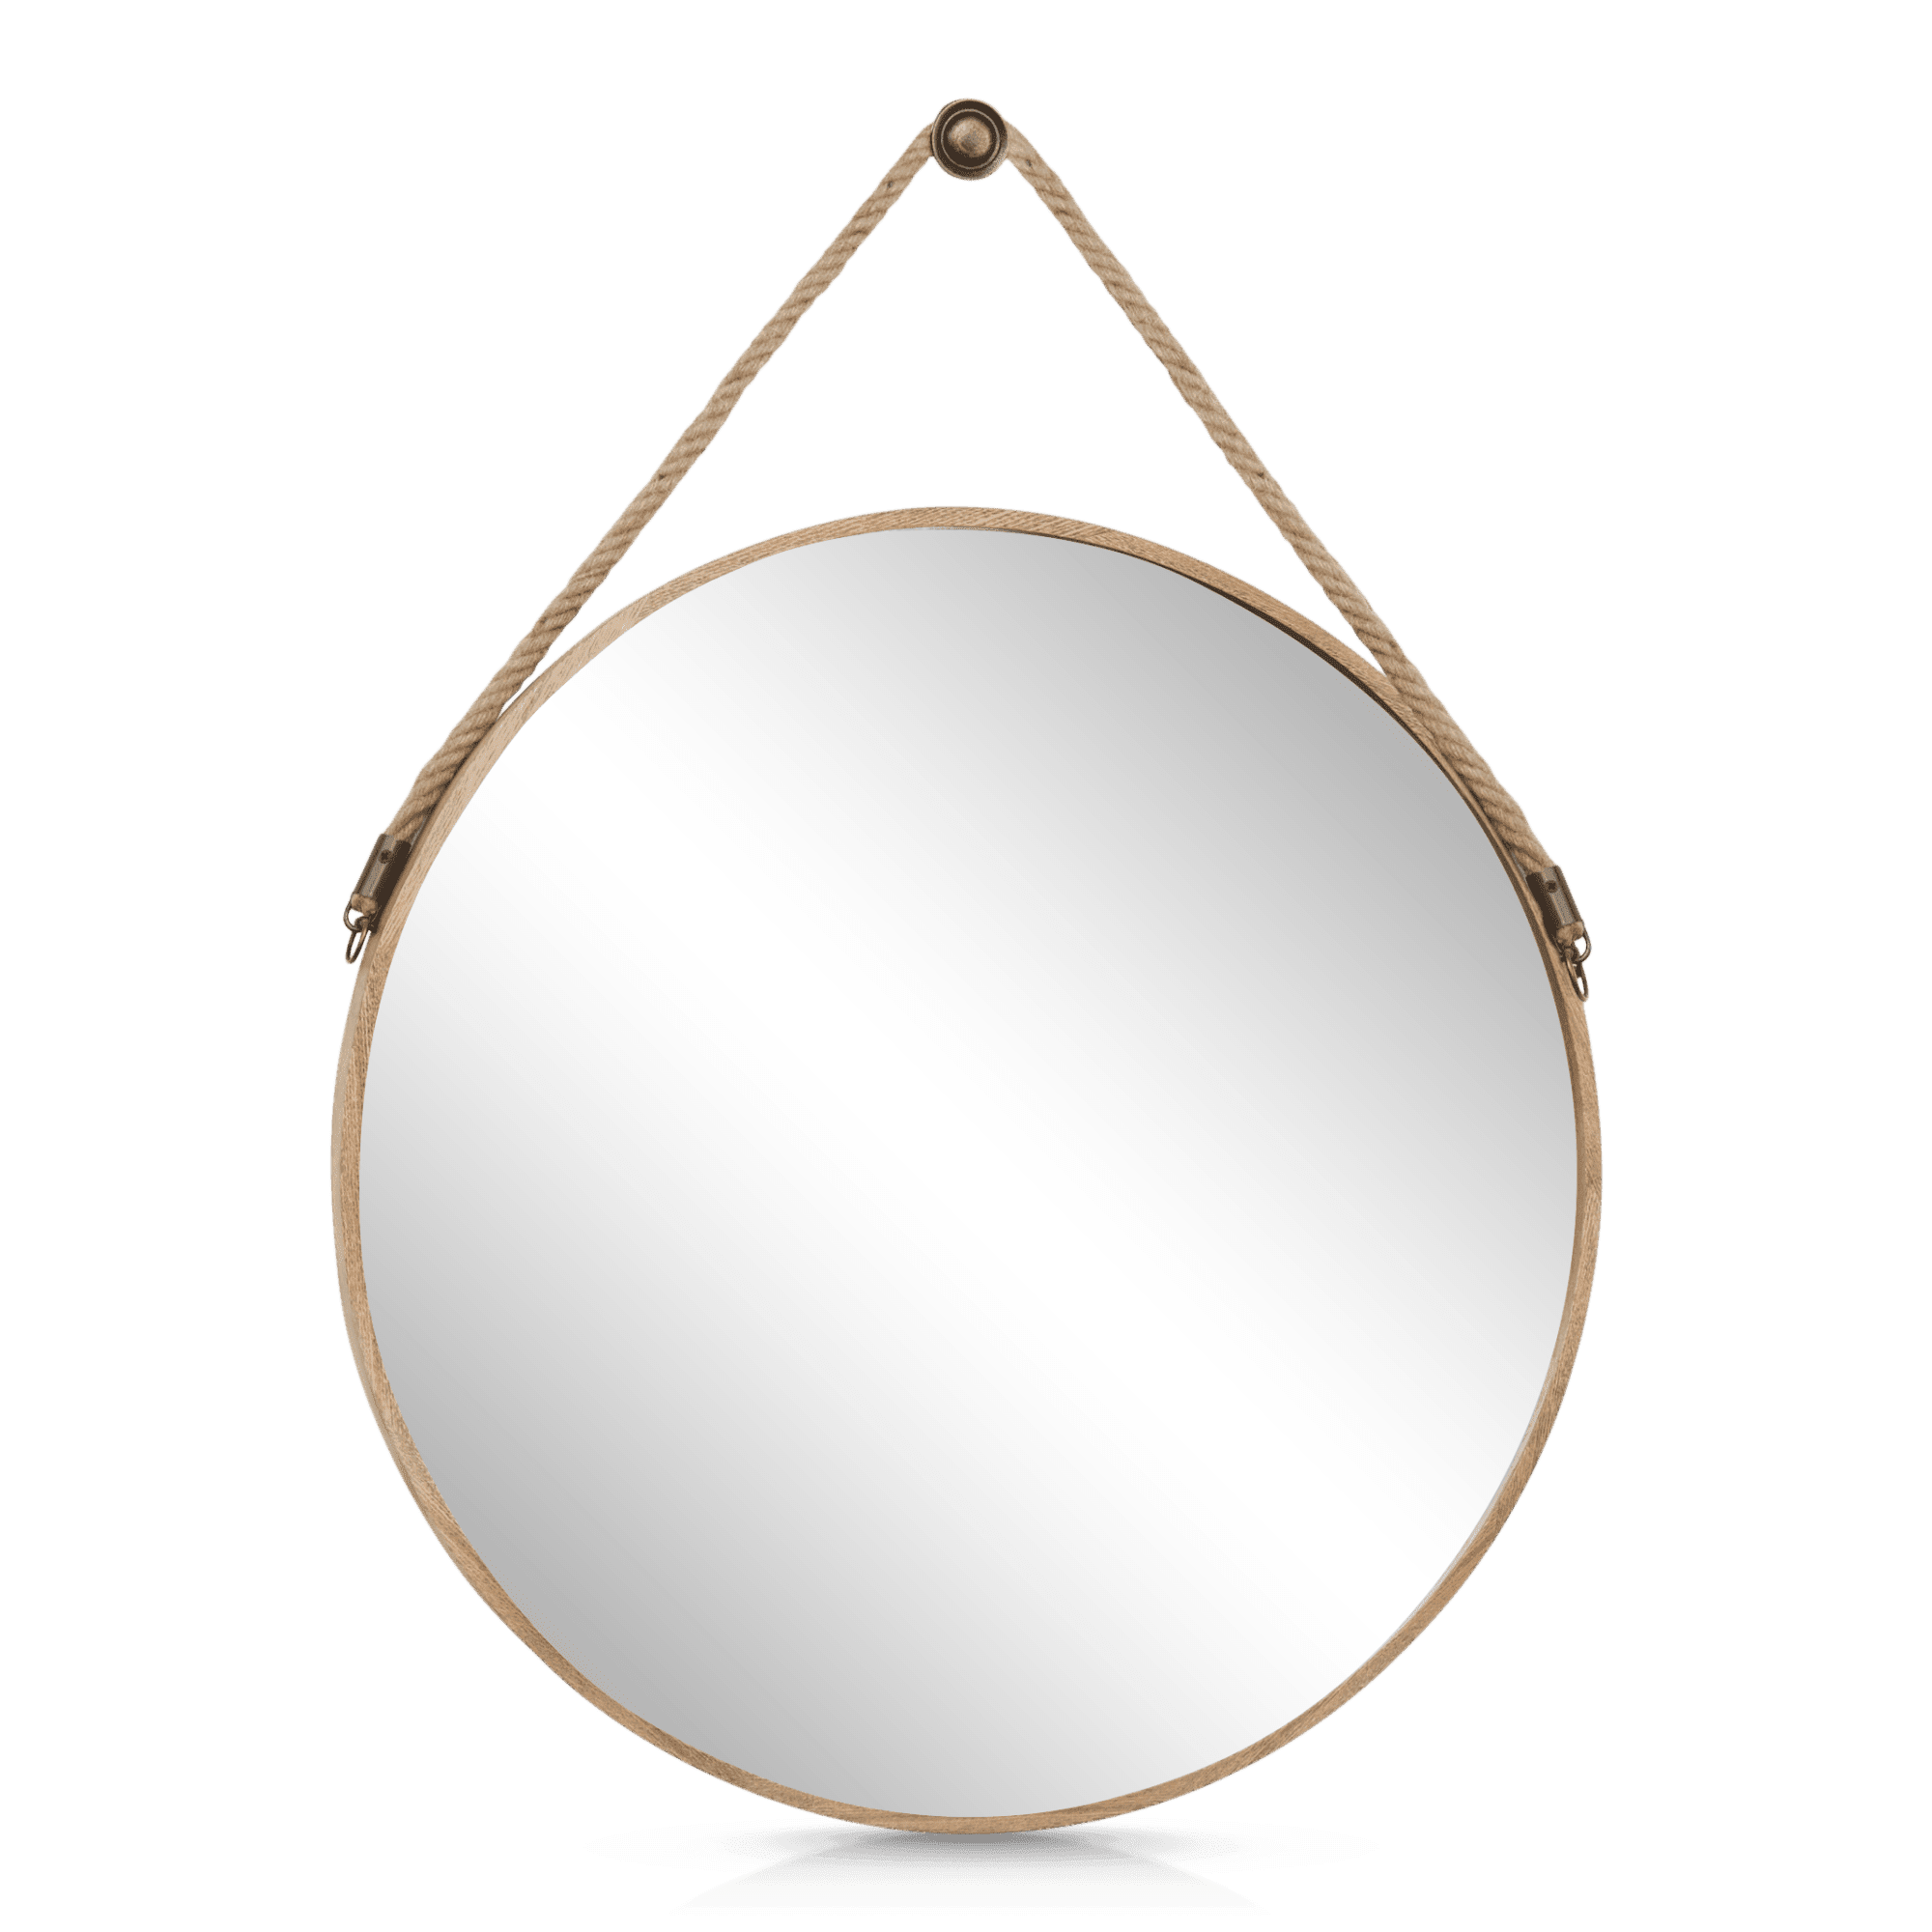 Round Hanging Mirror with Hook